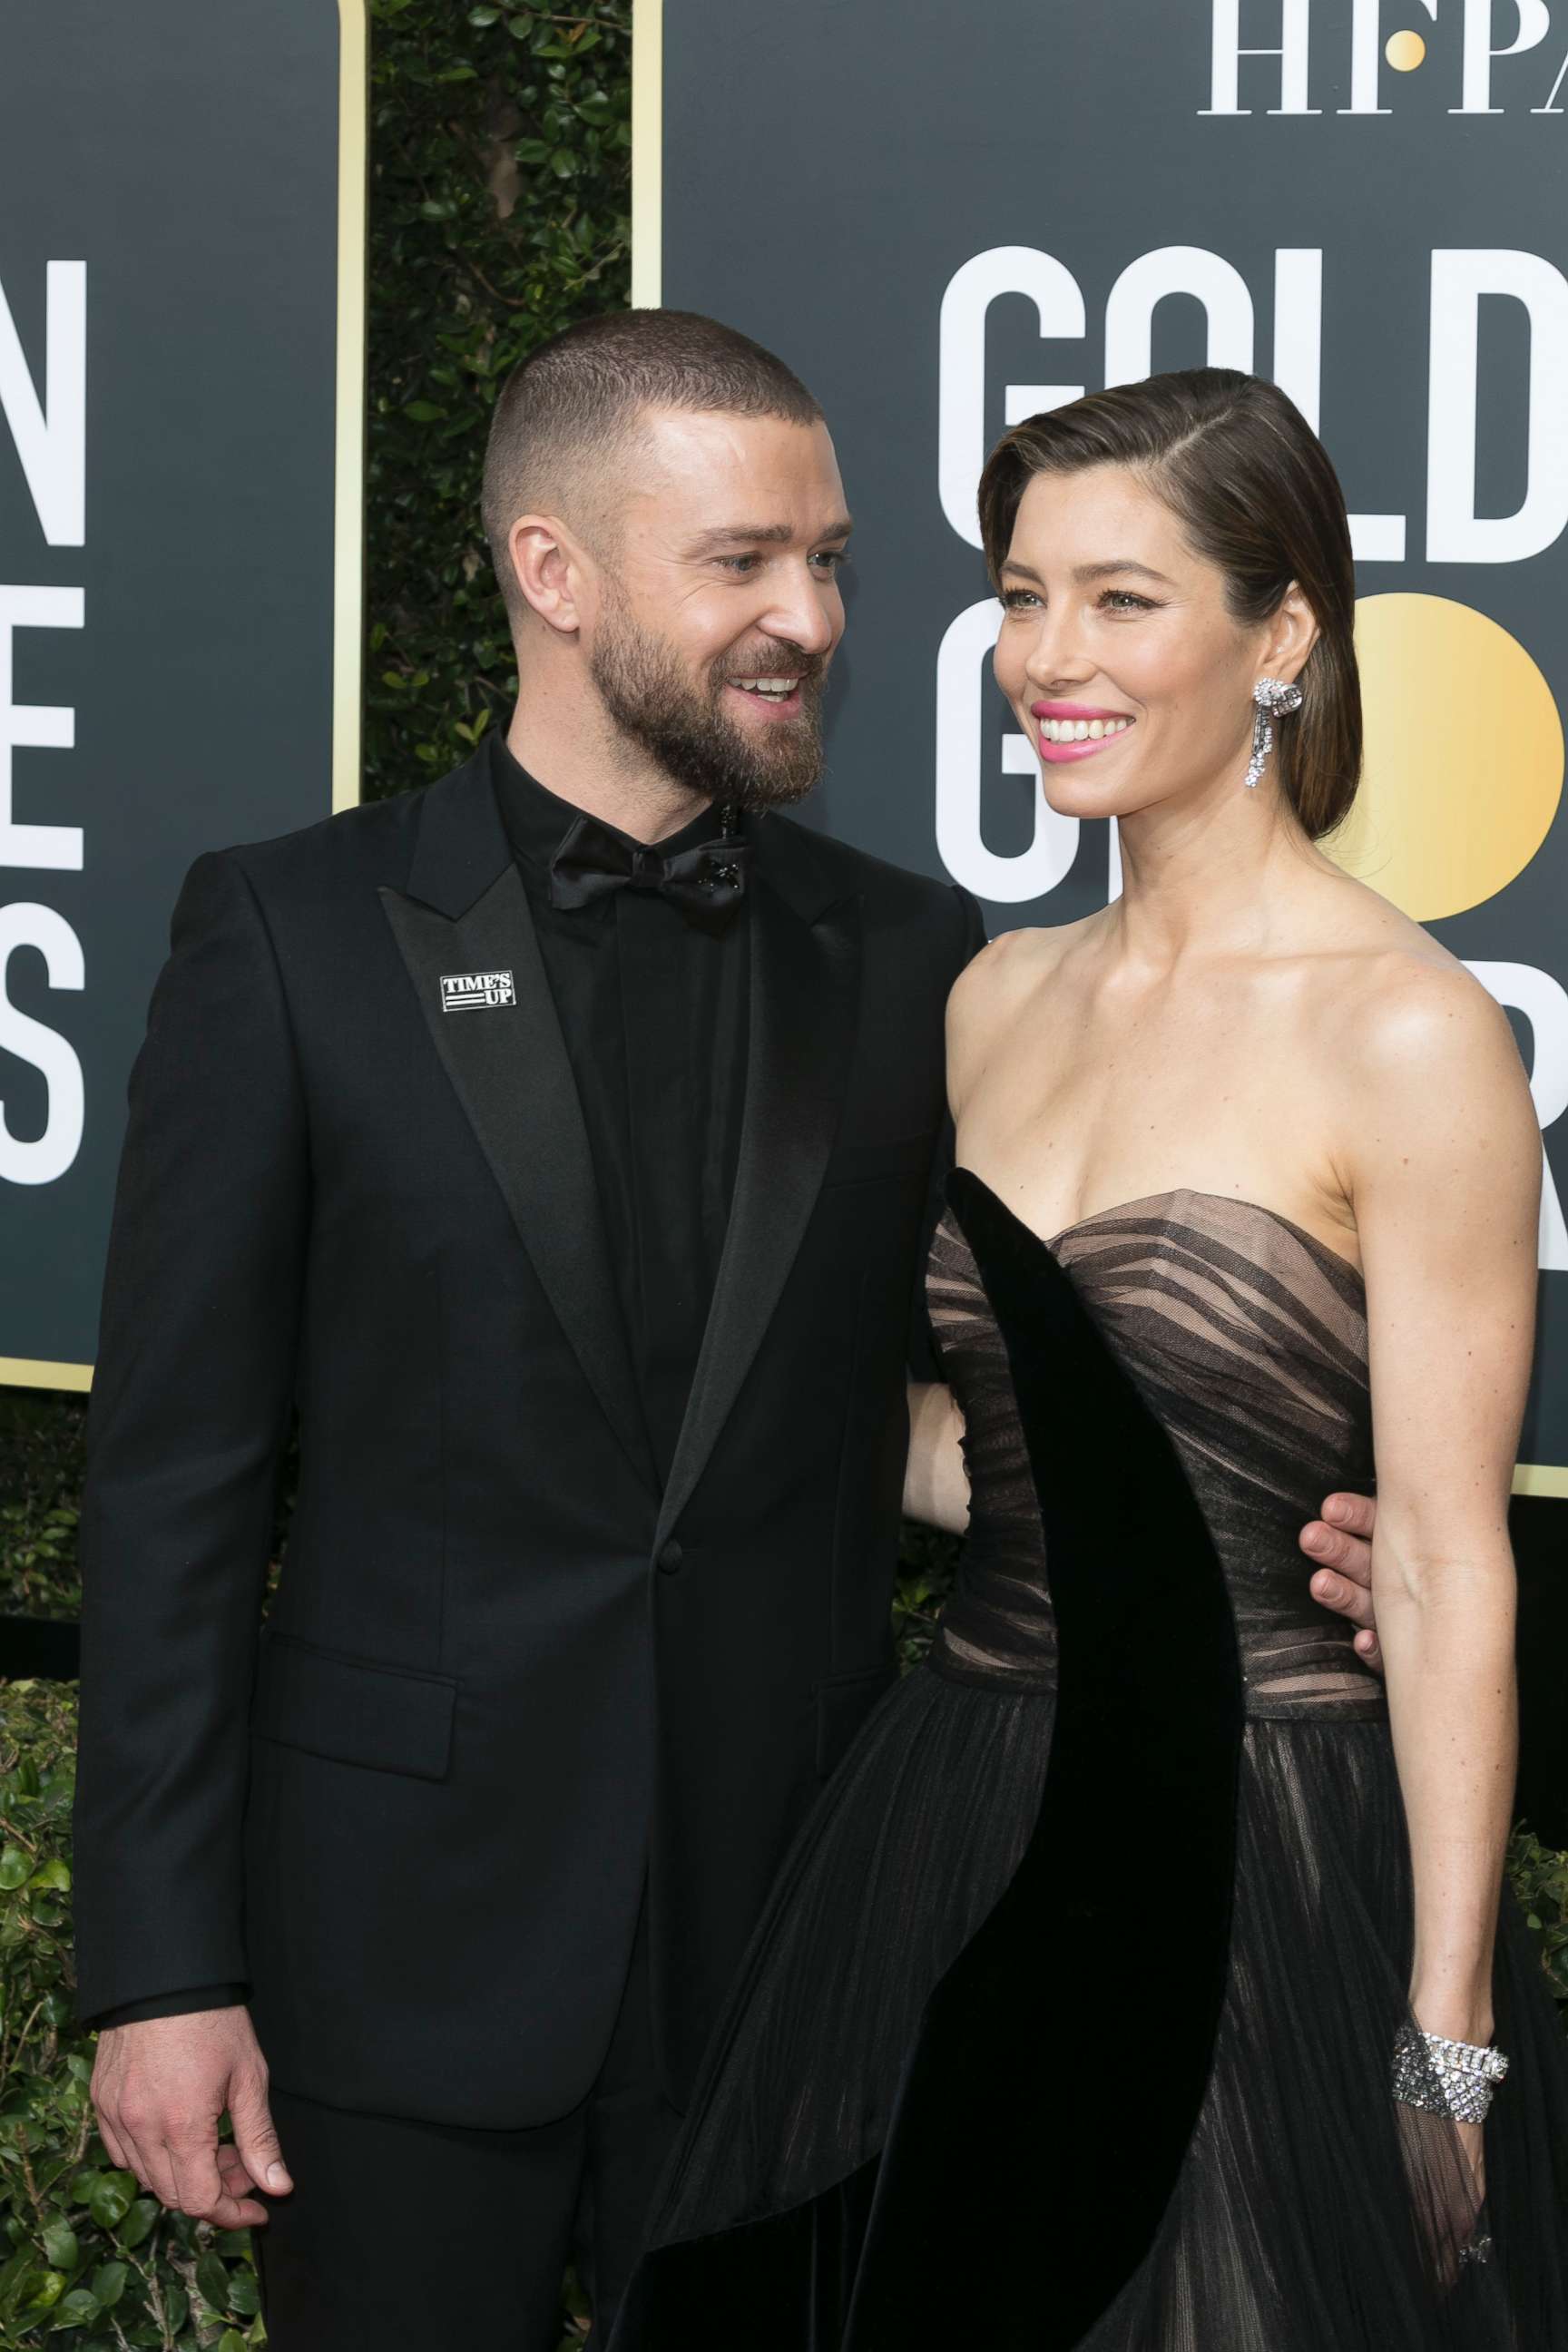 PHOTO: Justin Timberlake and Jessica Biel attend the 75th Golden Globe Awards 2018 at Hotel Beverly Hilton in Beverly Hills, Los Angeles, Jan. 7, 2018.